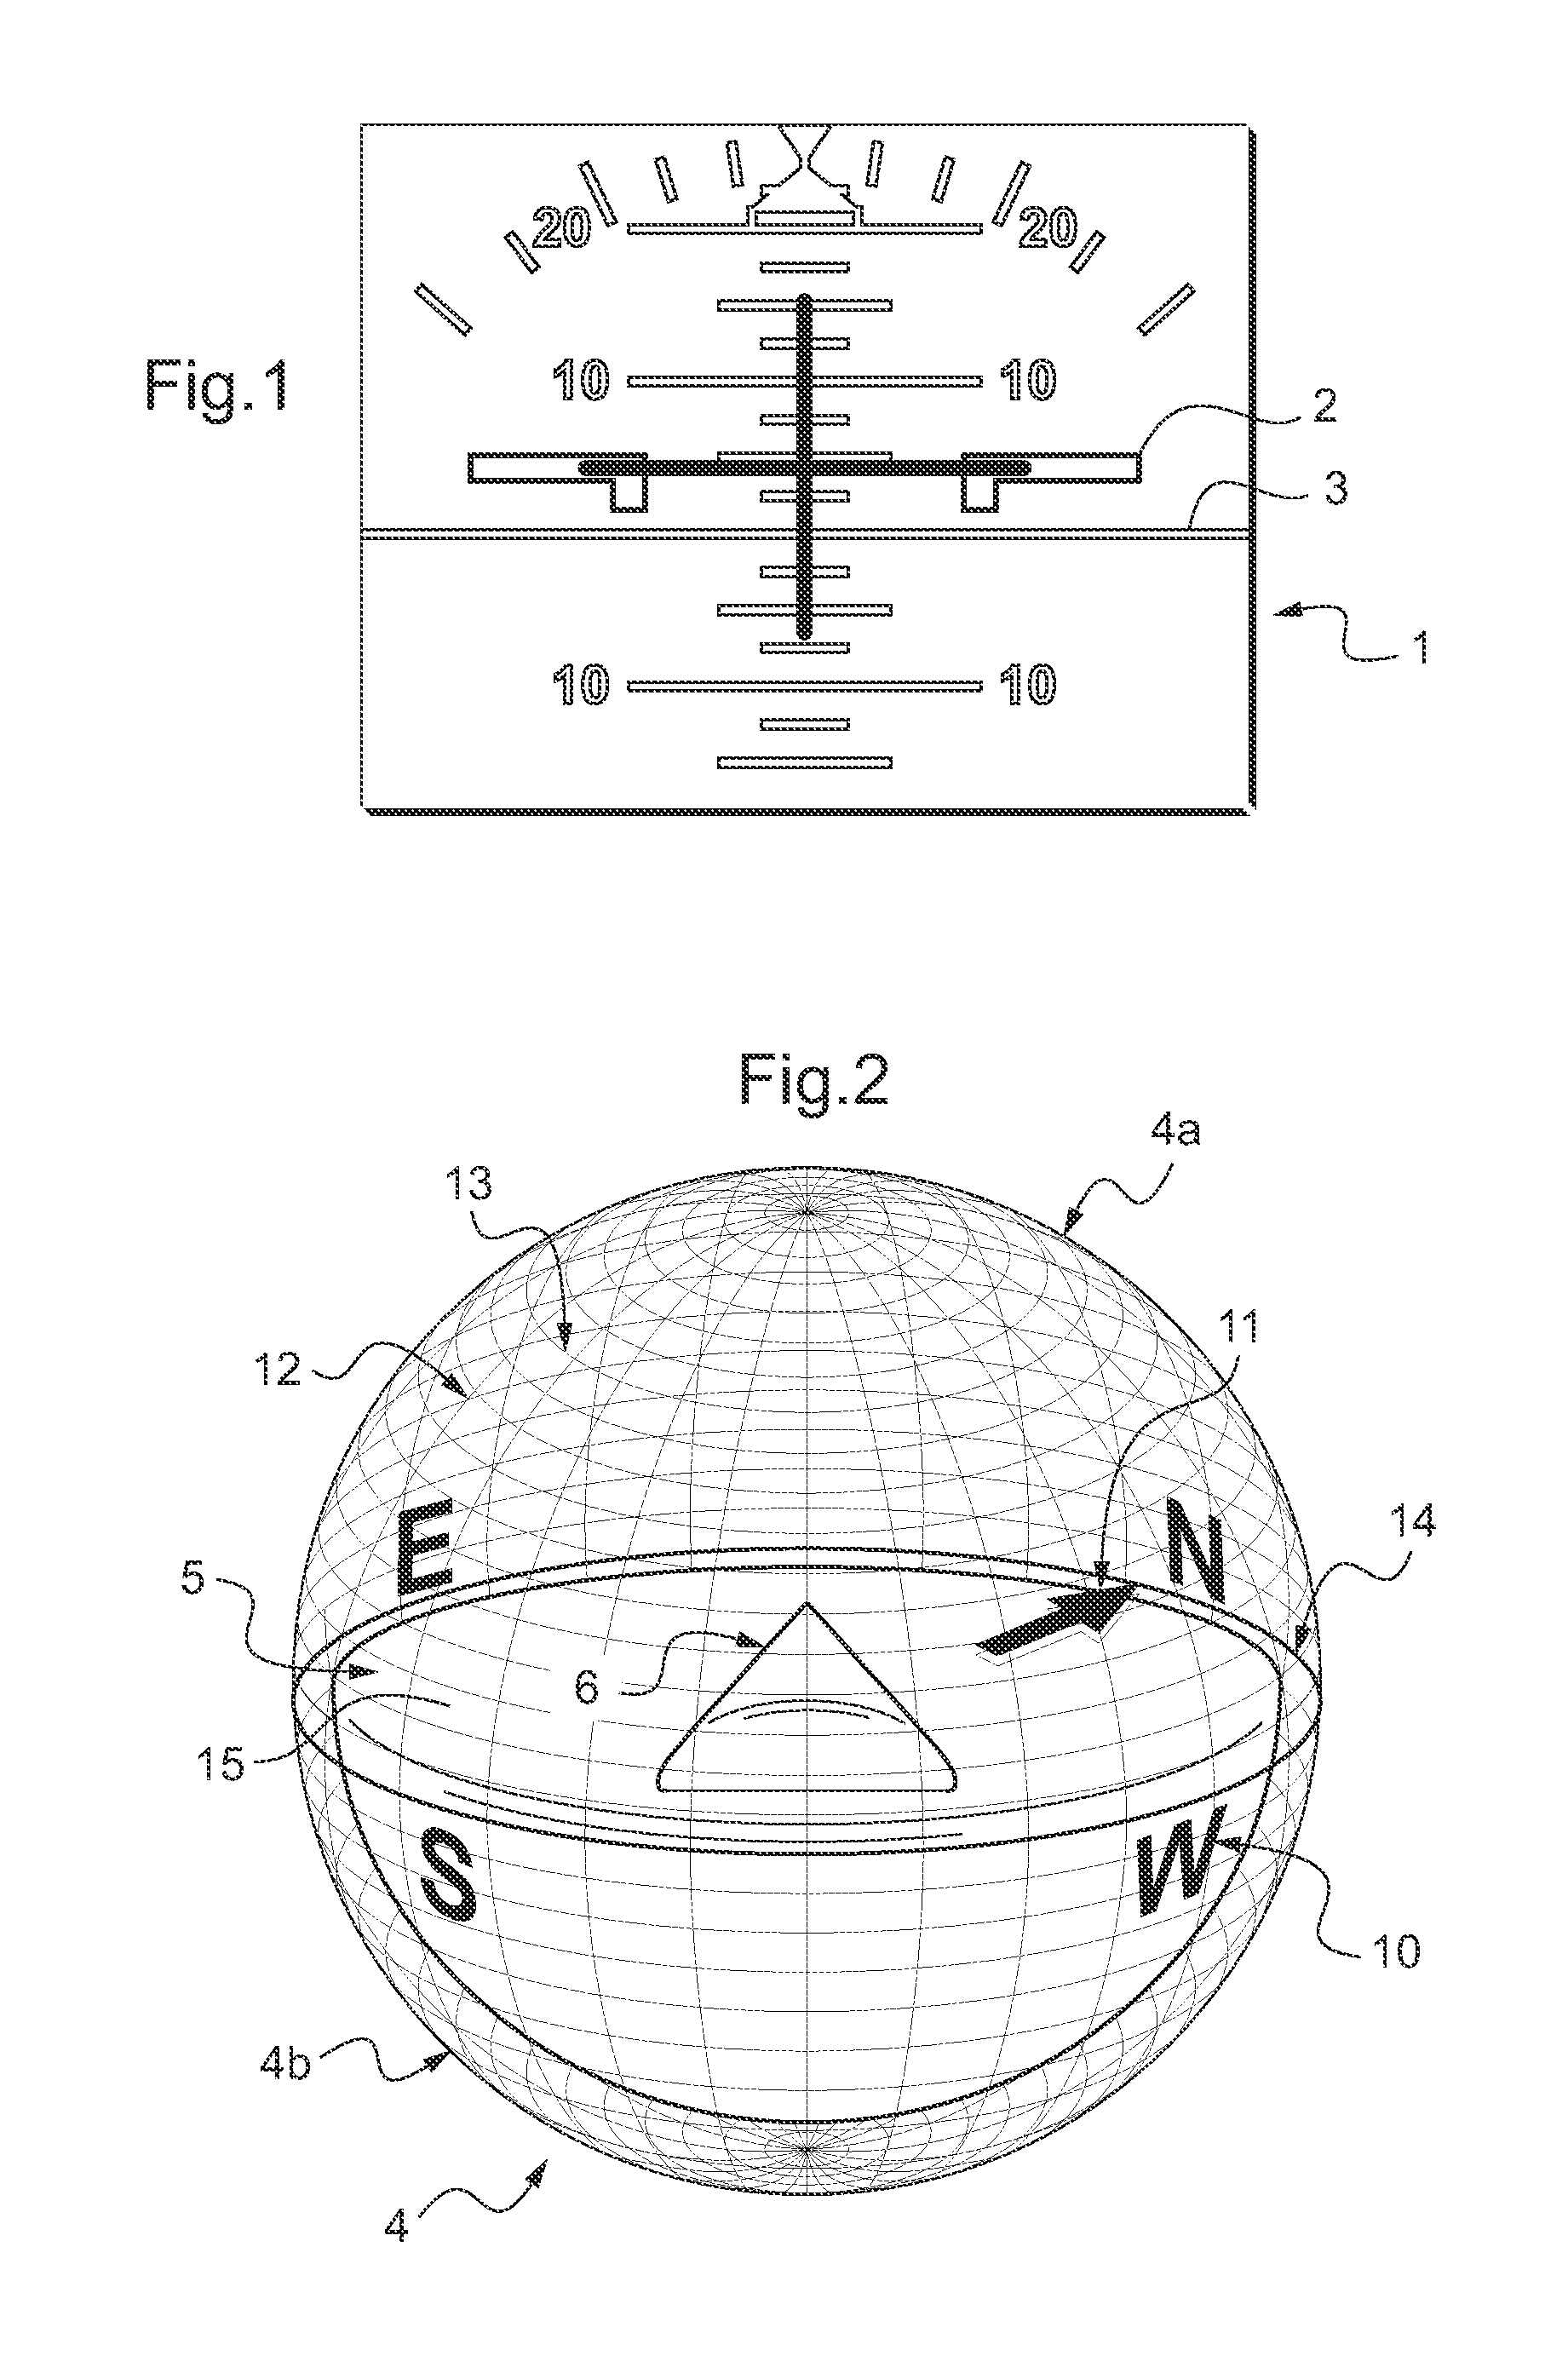 Method for presenting spatial attitude and heading information of a vehicle